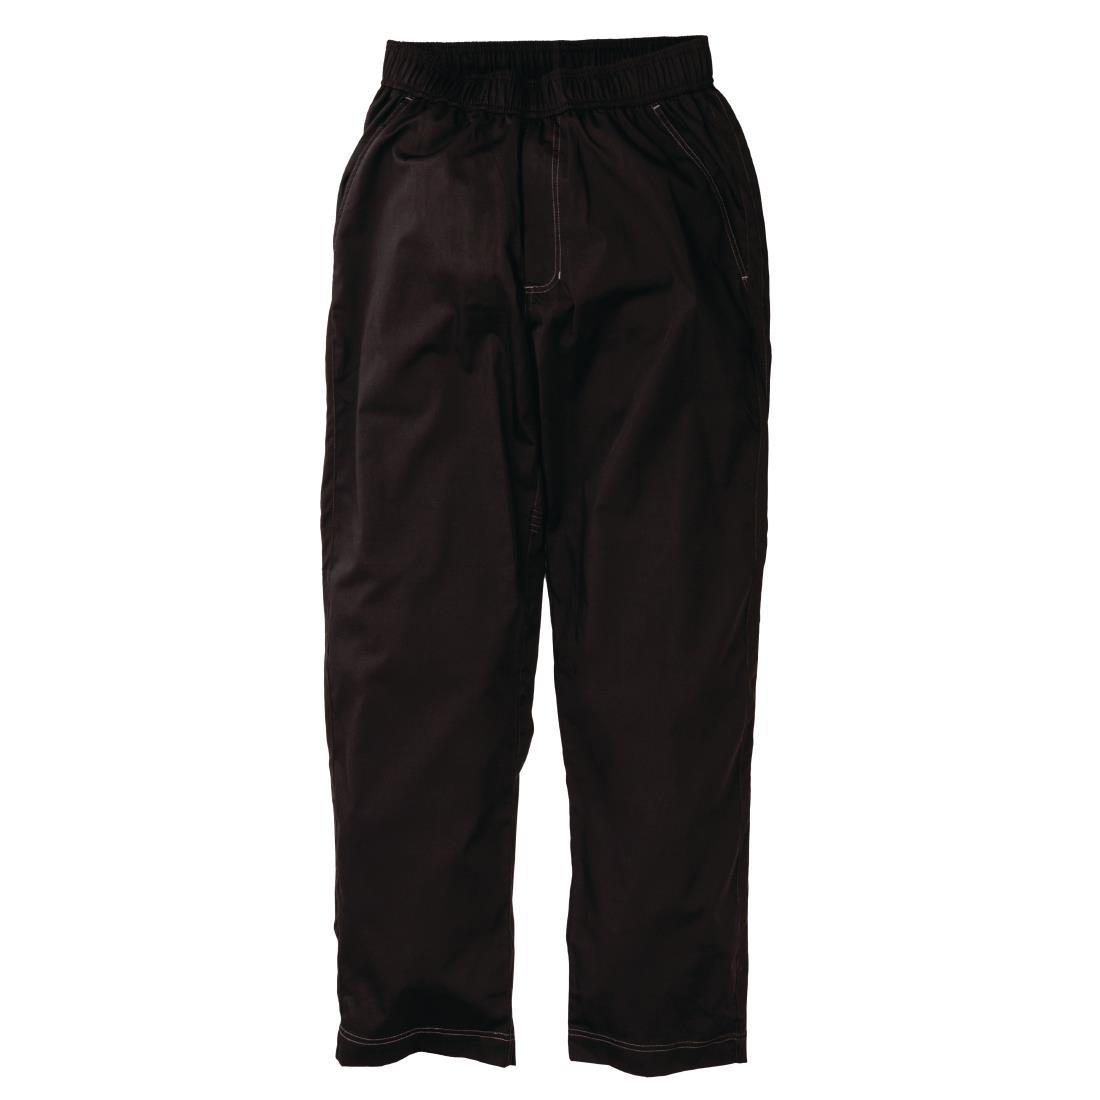 Chef Works Unisex Cool Vent Baggy Chefs Trousers Black M - B187-M  - 3